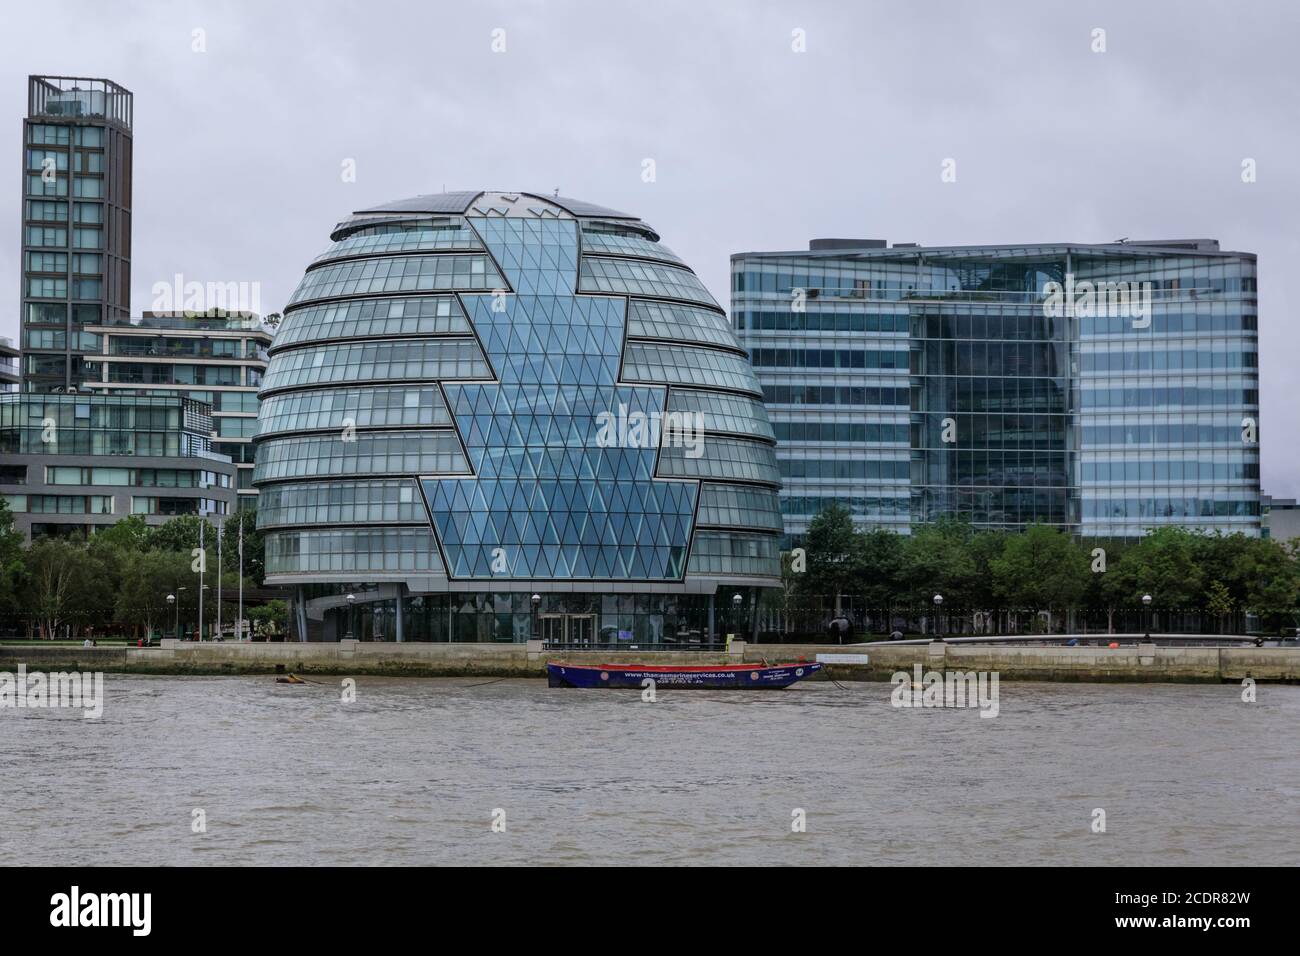 City Hall (m) from the River Thames, headquarters of the Greater London Authority (GLA), the Mayor of London and London Assembly, London, England, UK Stock Photo